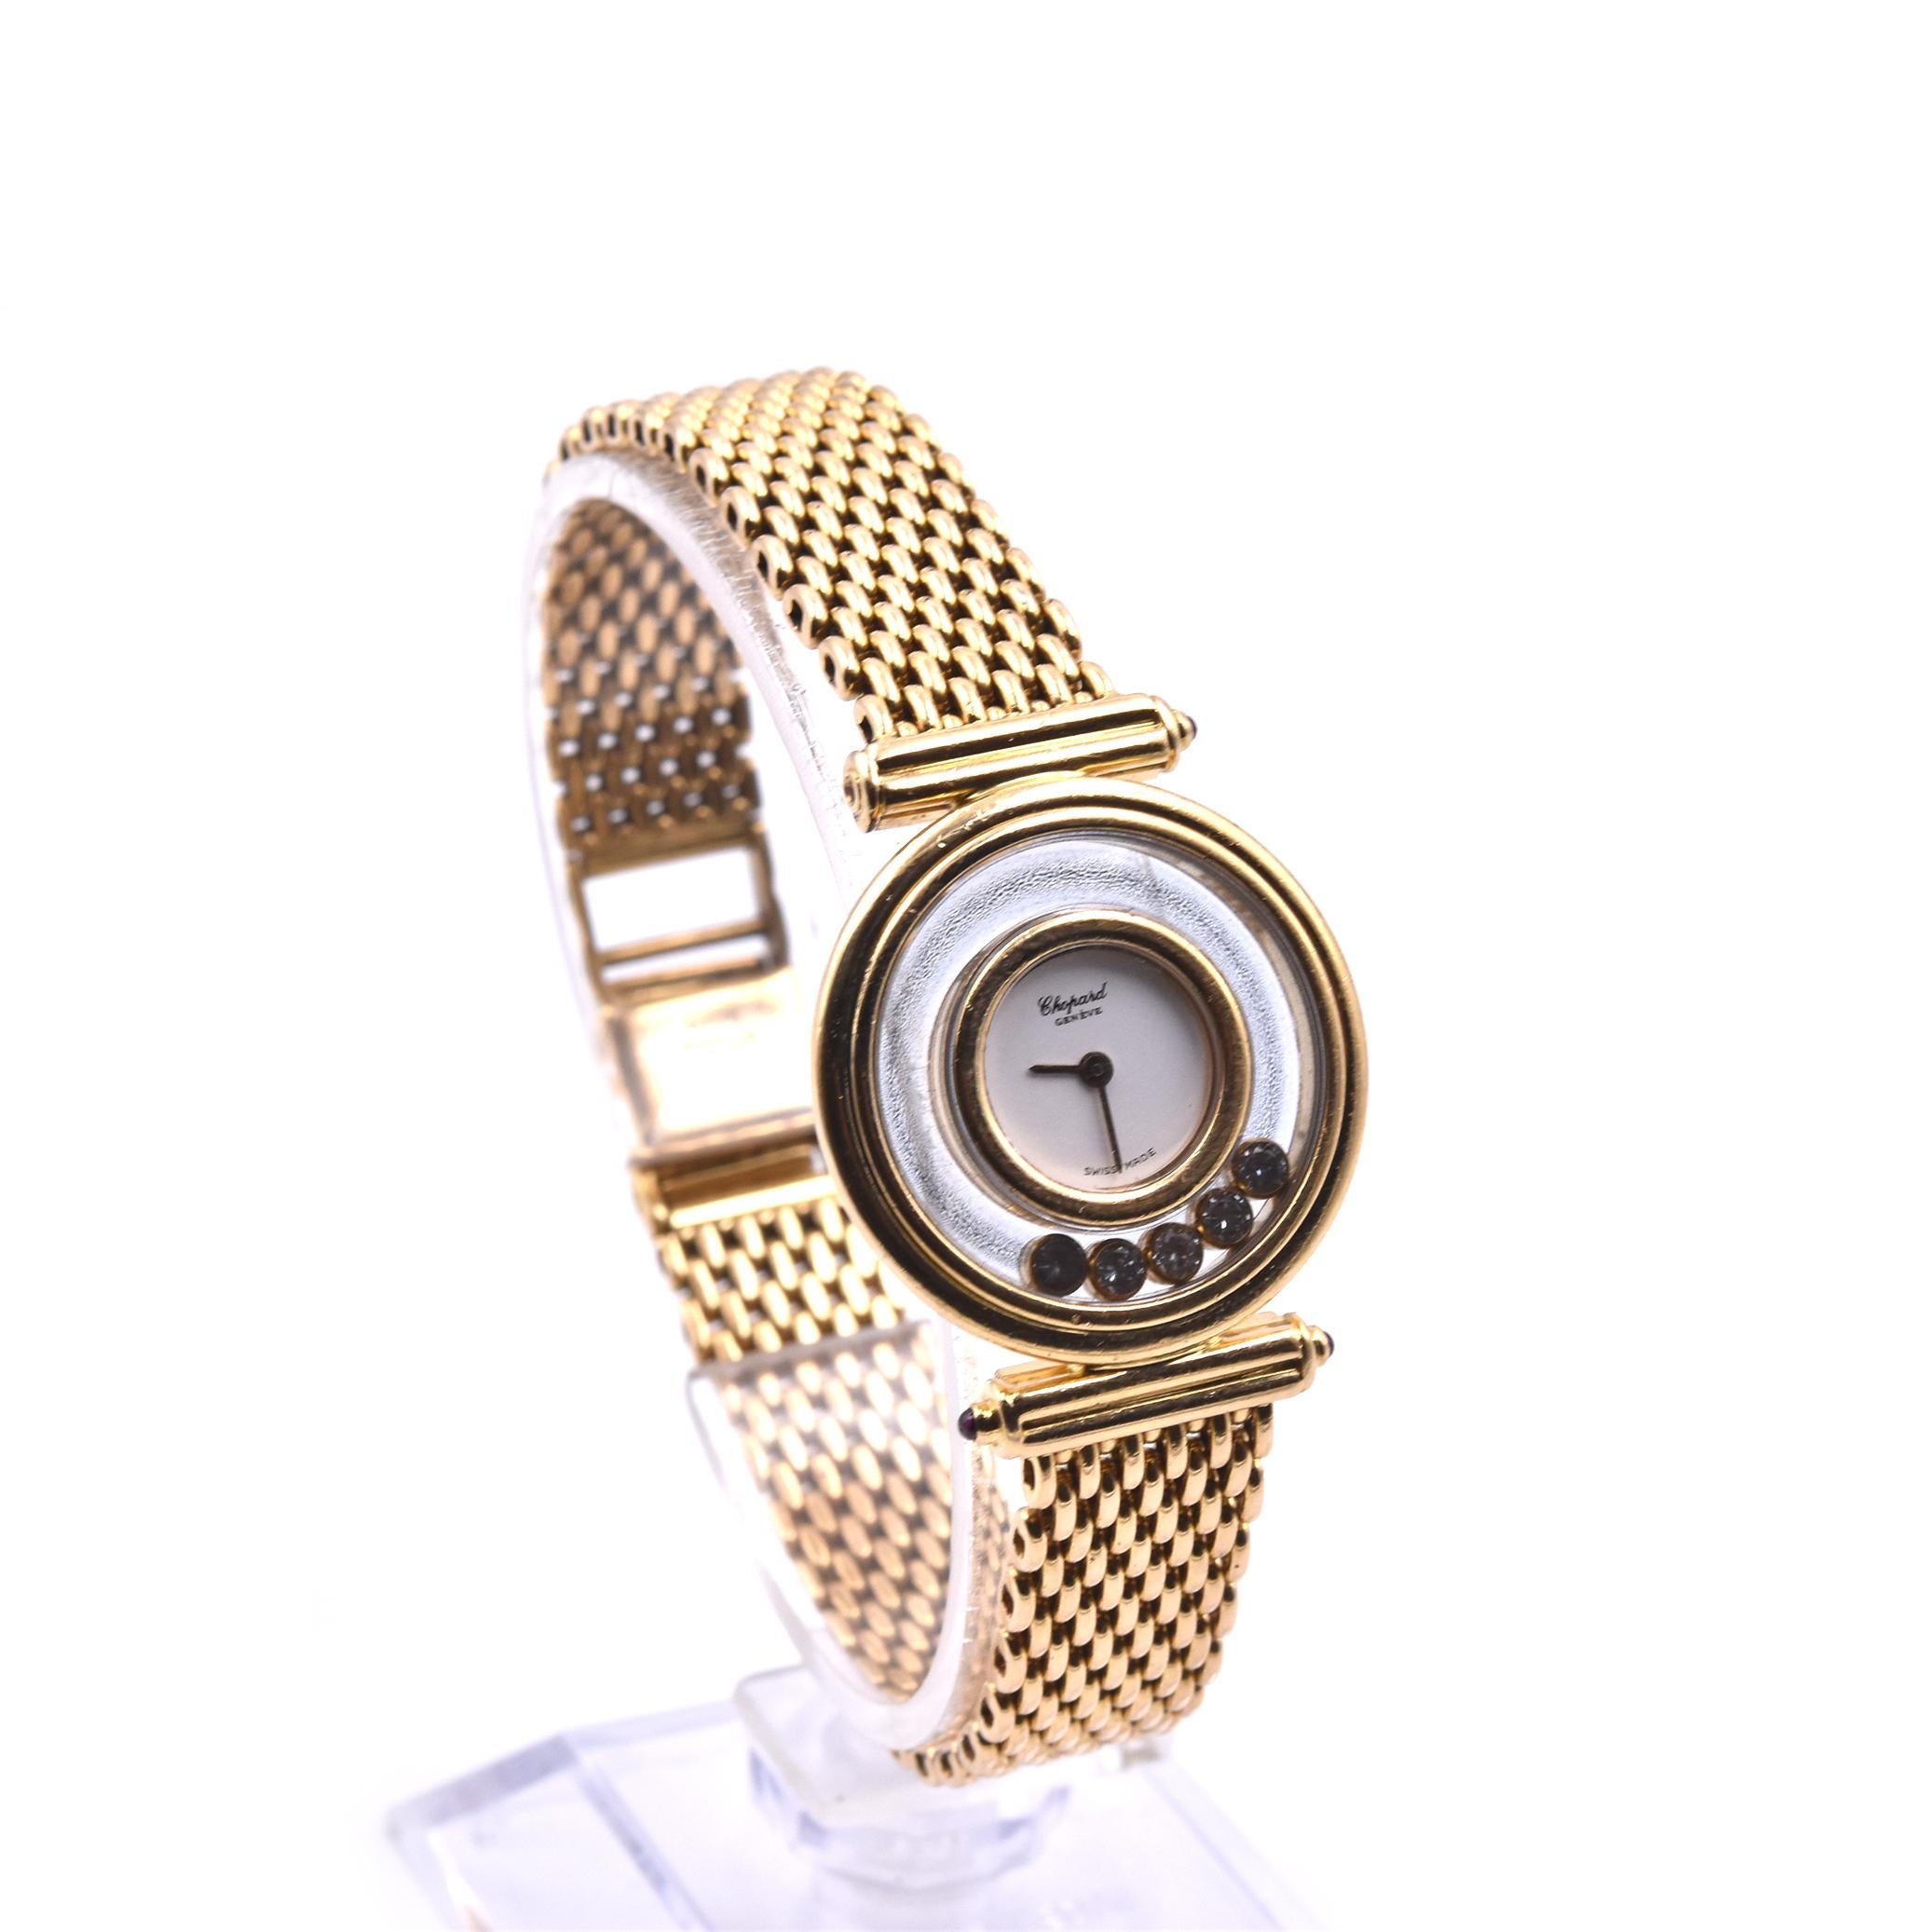 Movement: quartz
Function: hours, minutes
Case: 25mm 18k yellow gold case, floating diamonds bezel, sapphire protective crystal
Band: 18k yellow gold bracelet with double fold down clasps
Dial: white dial, gold hands
Reference #: 4101
Serial: